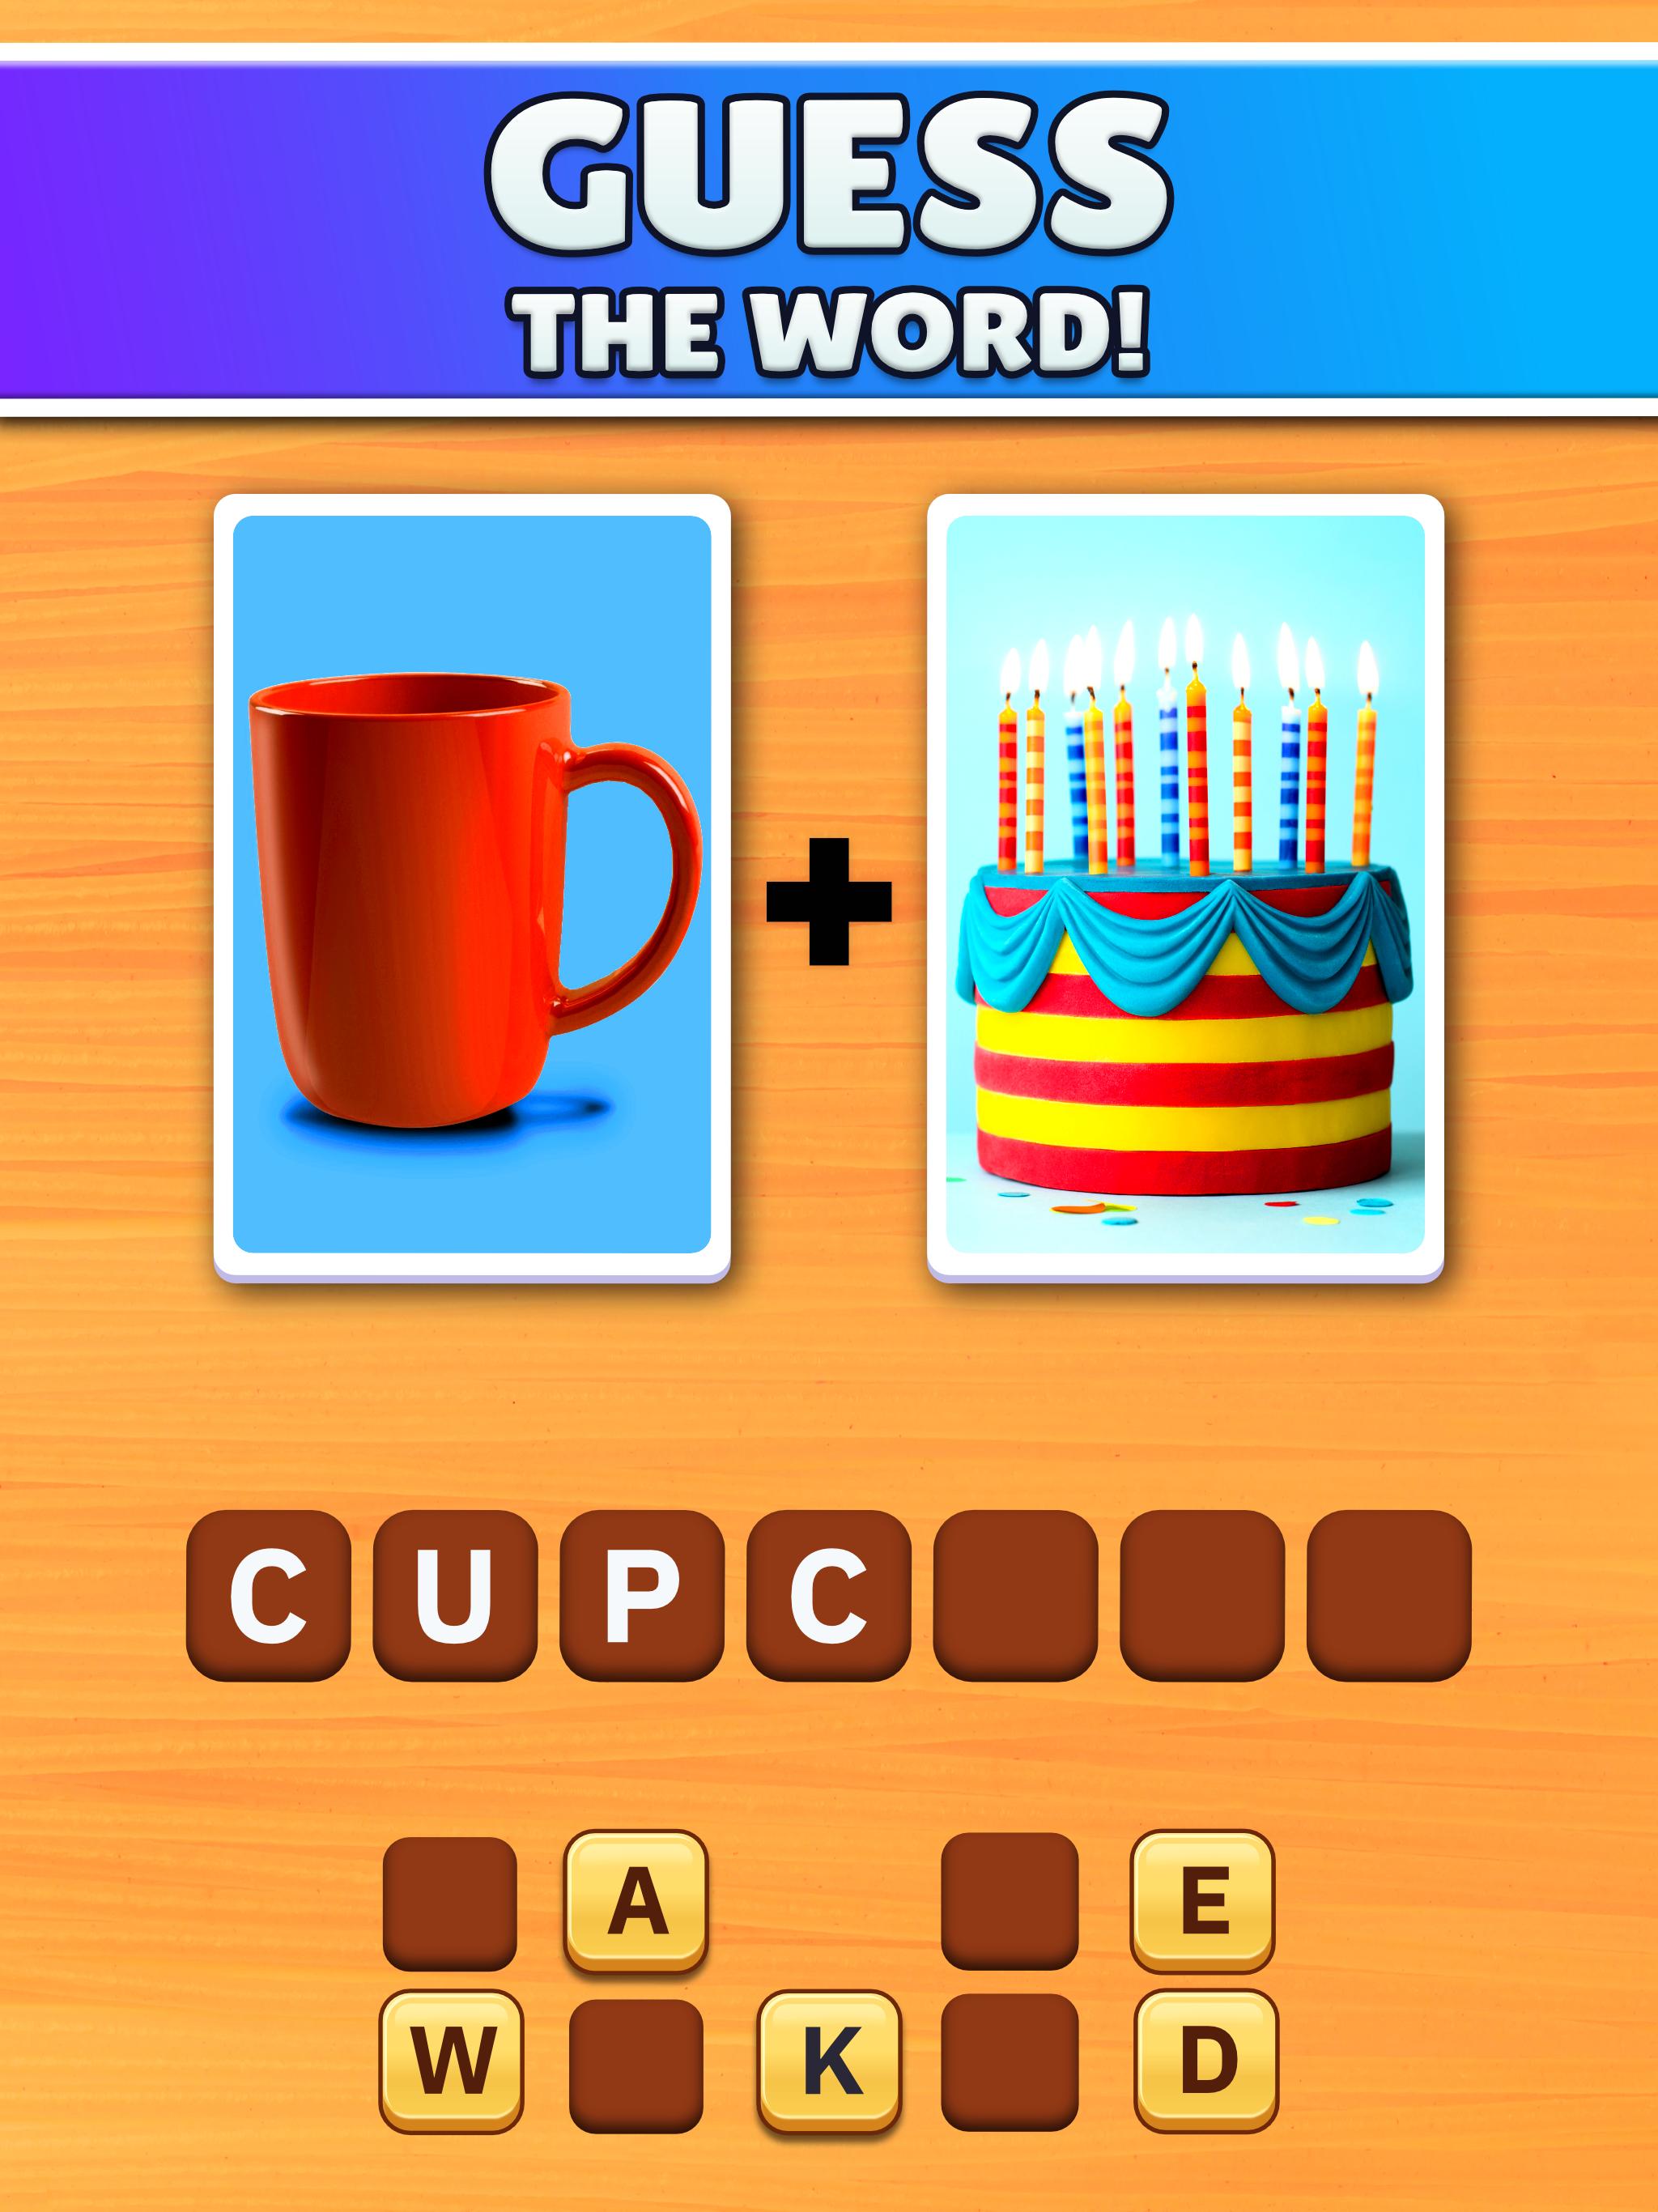 Wordgames com game 4 pics 1 word. Word games. Word pic. Pictures one Word game. Loaker вафли ответы к игре zoomquiz.